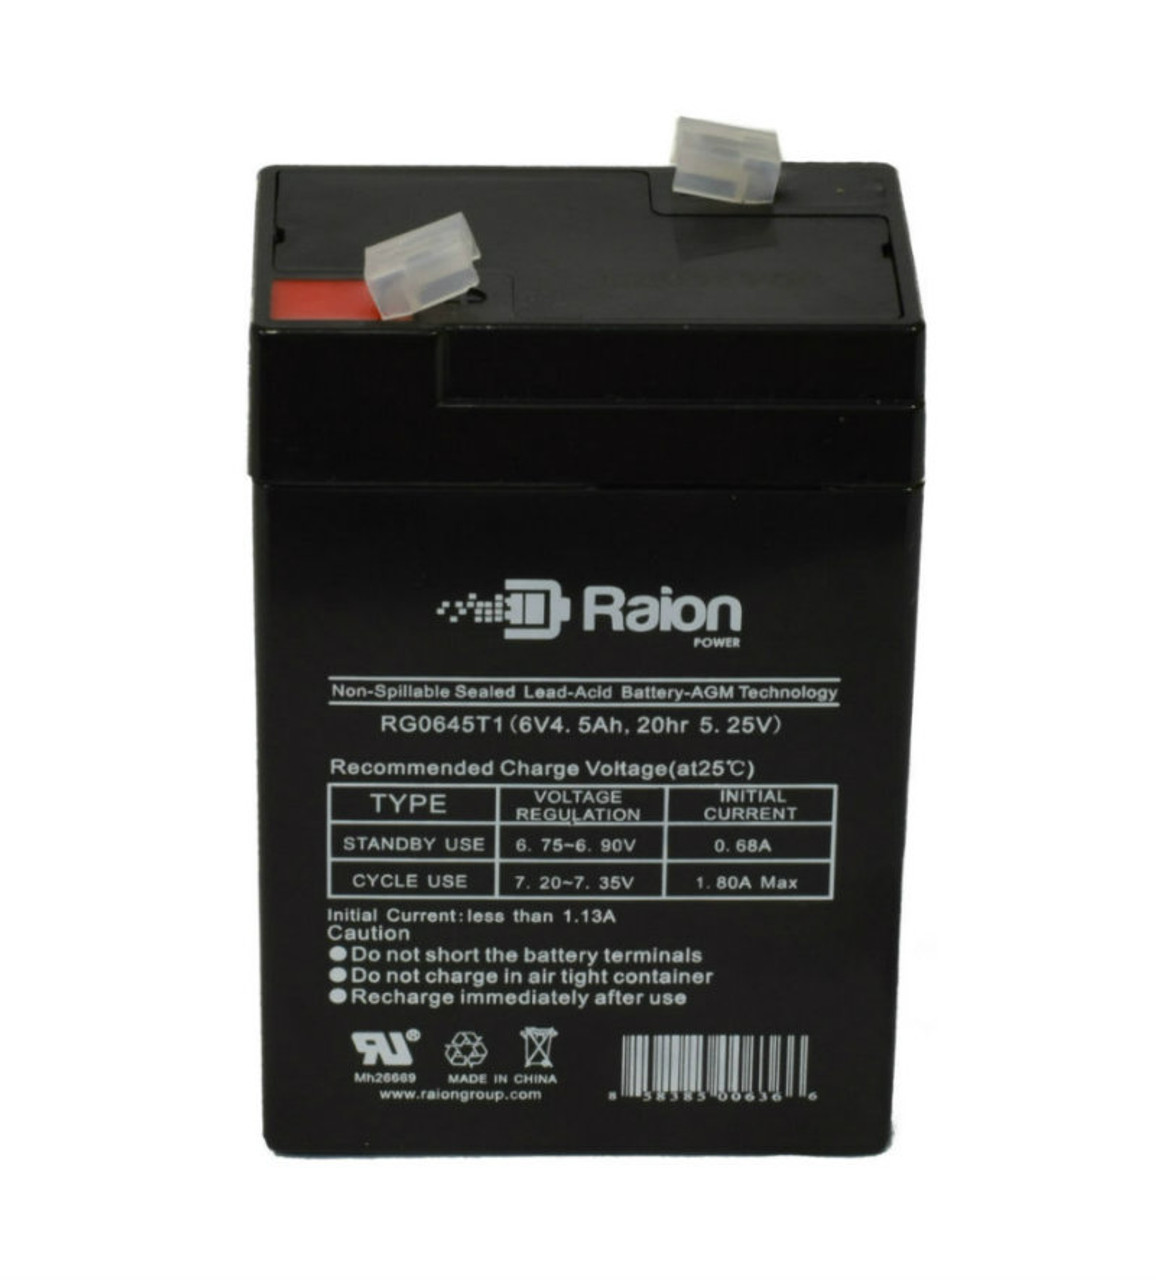 Raion Power RG0645T1 Replacement Battery Cartridge for National Power GS012P3